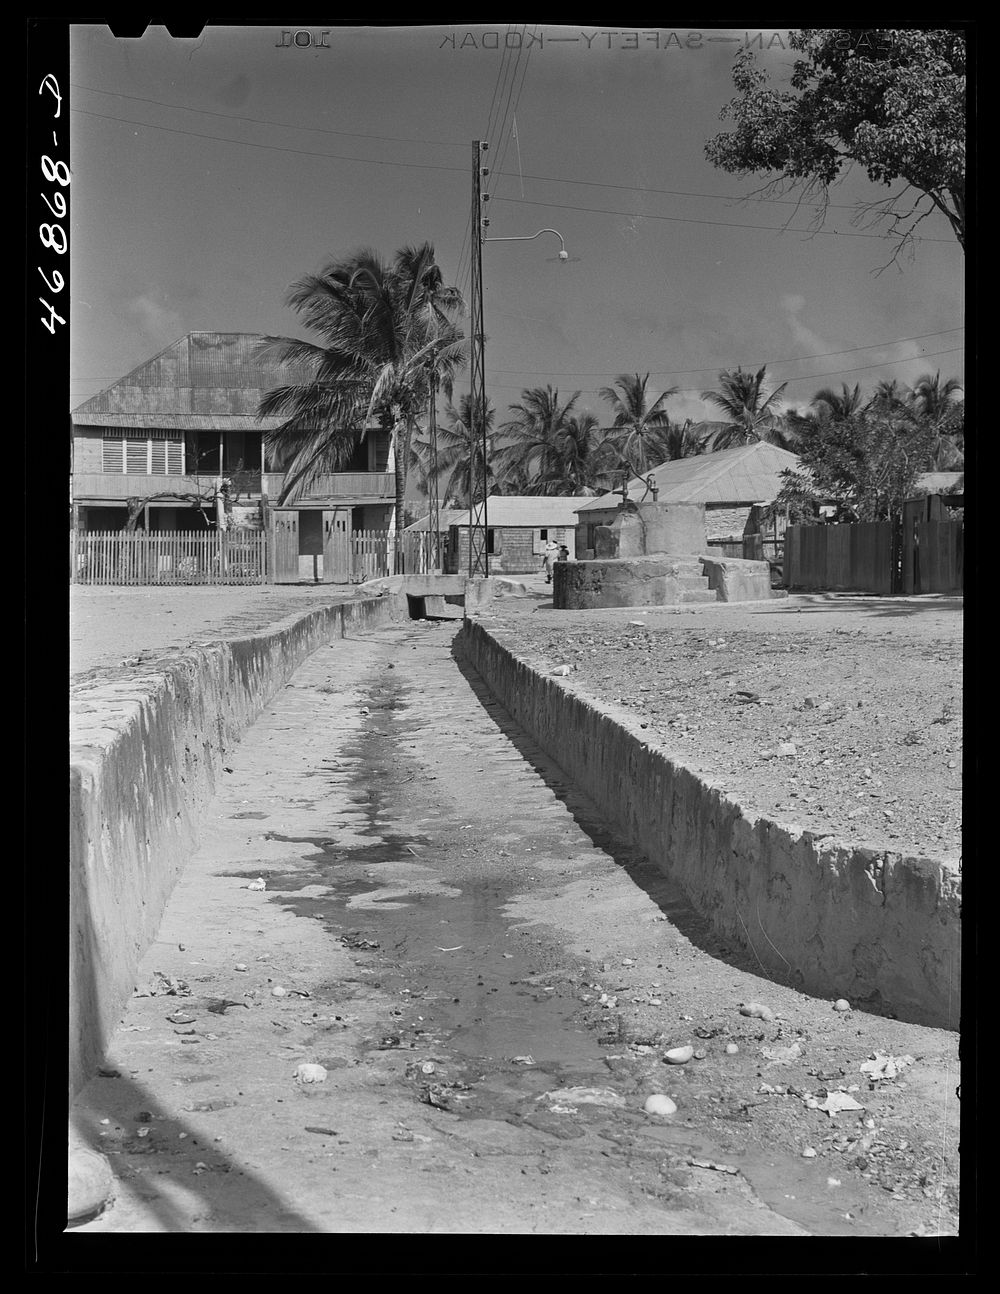 Christiansted, Saint Croix Island, Virgin Islands. An open sewer. Sourced from the Library of Congress.